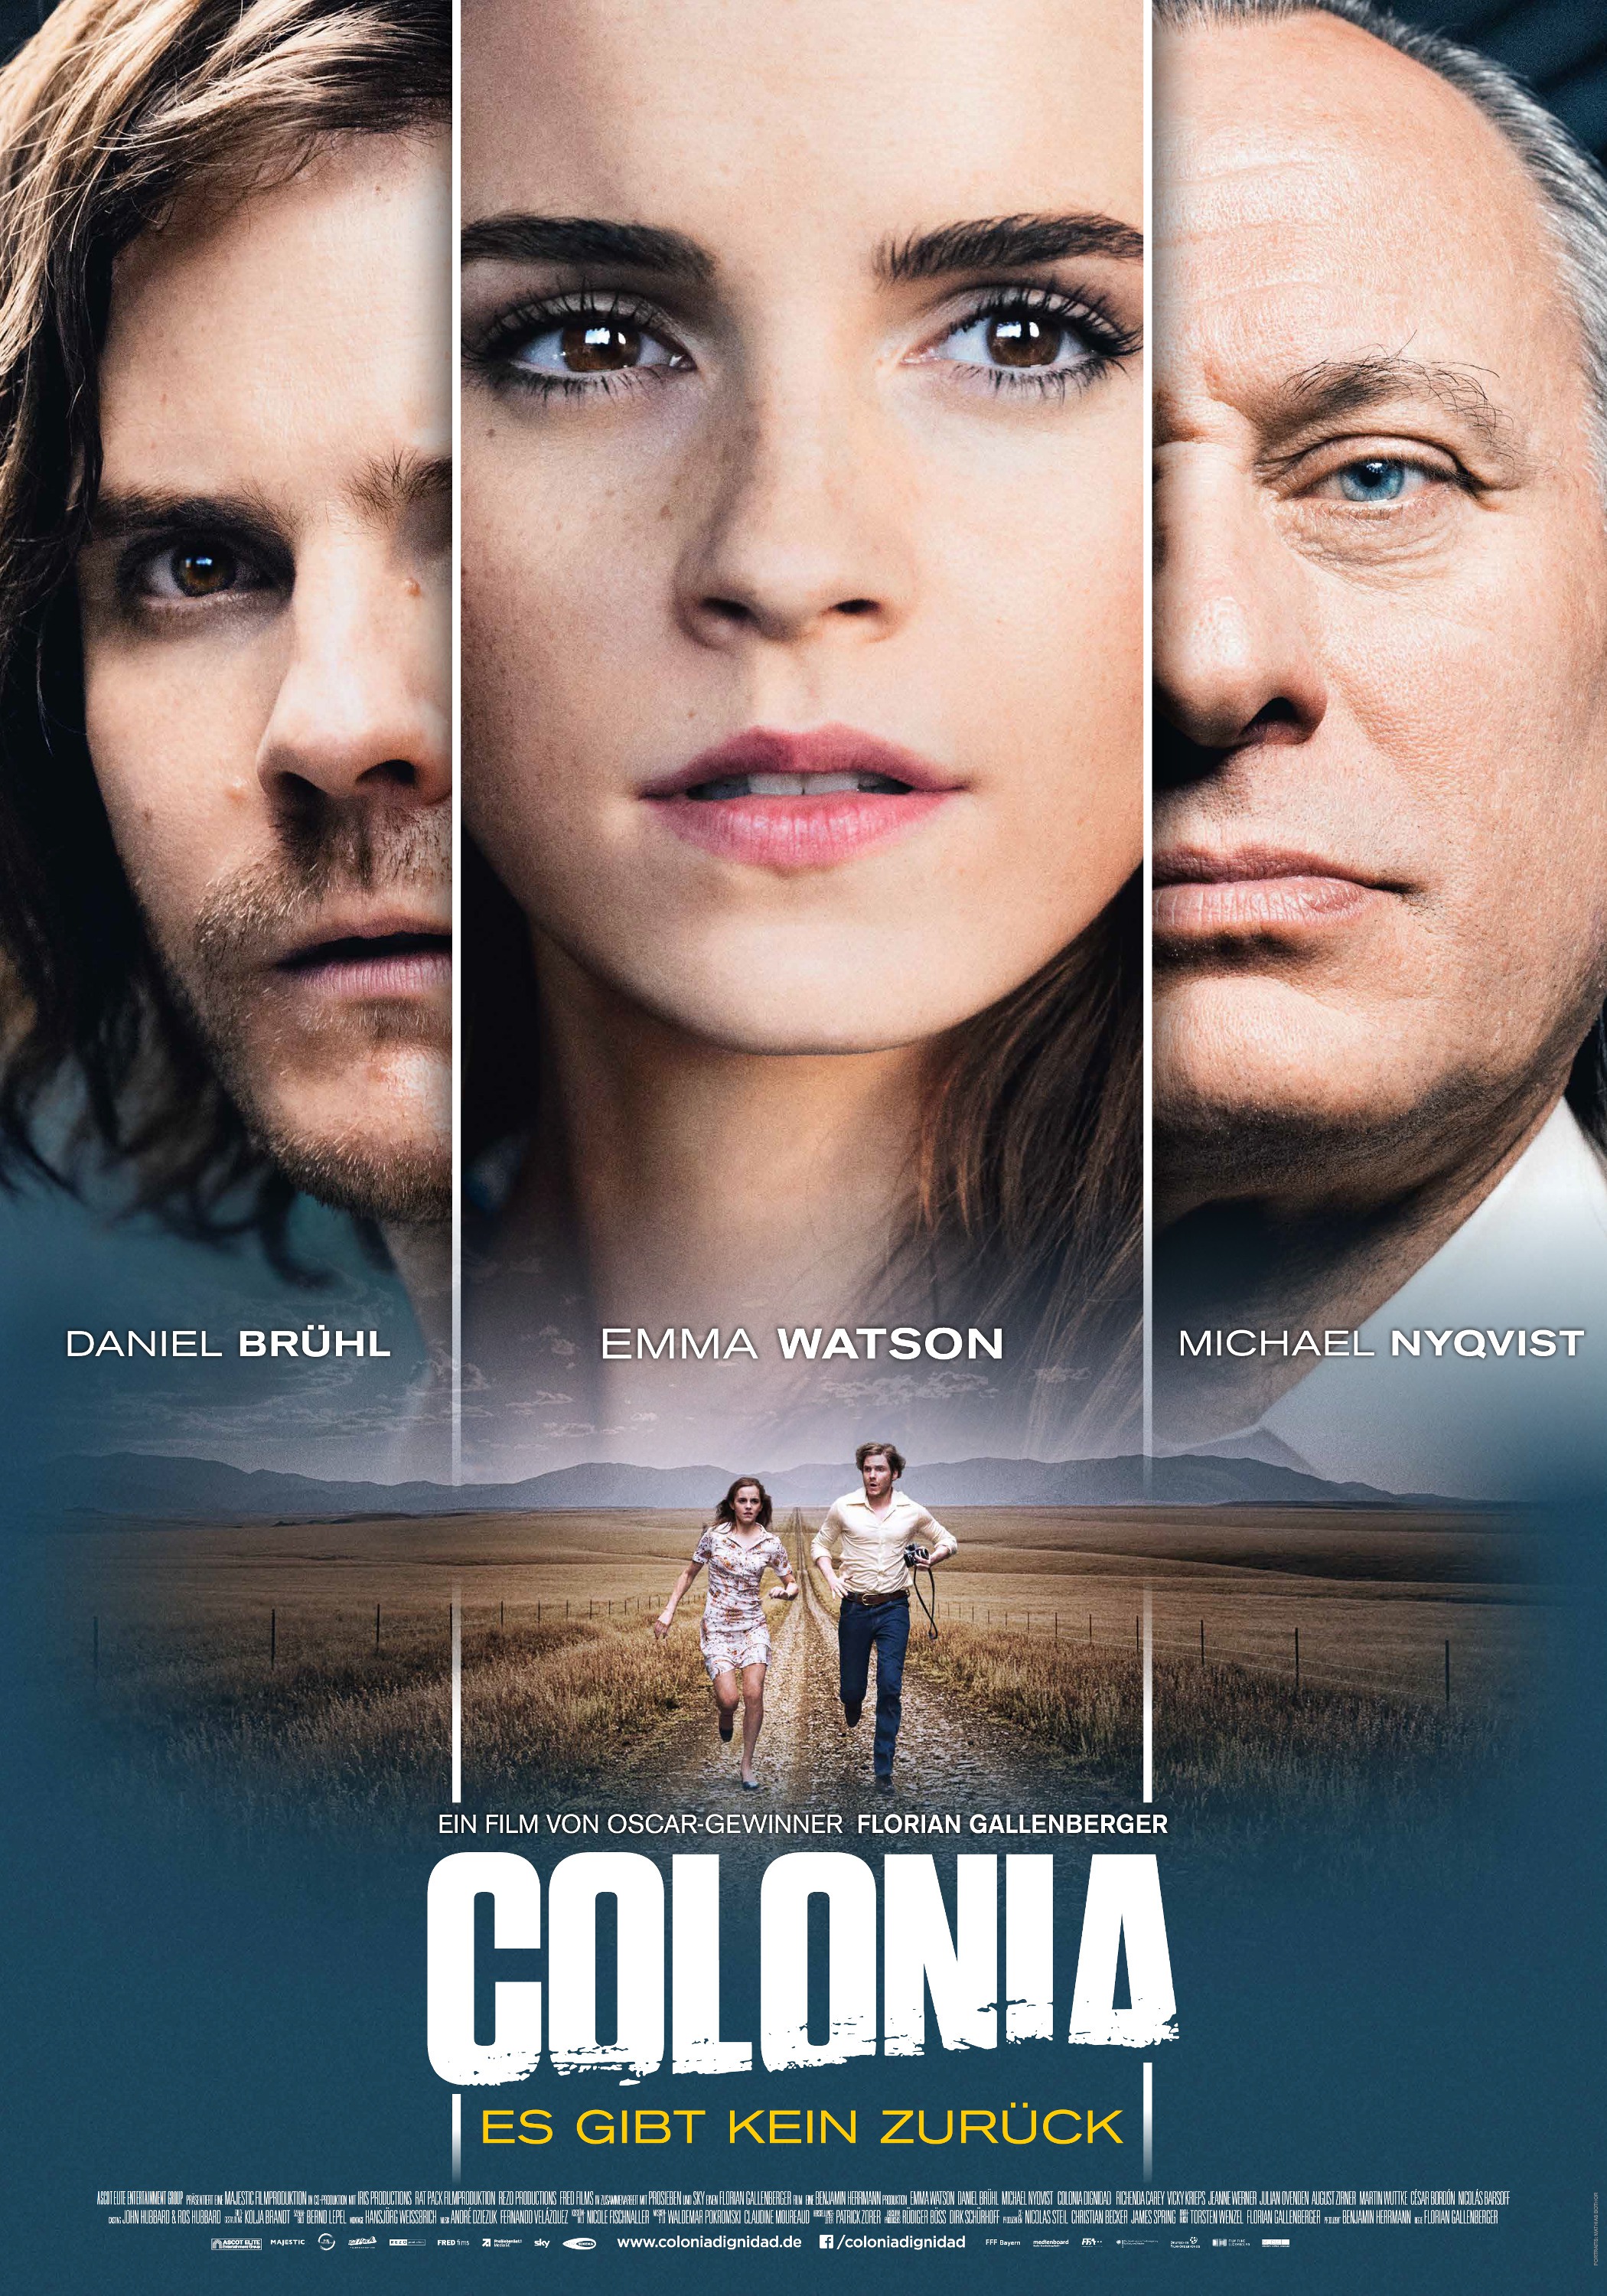 Mega Sized Movie Poster Image for Colonia (#3 of 7)